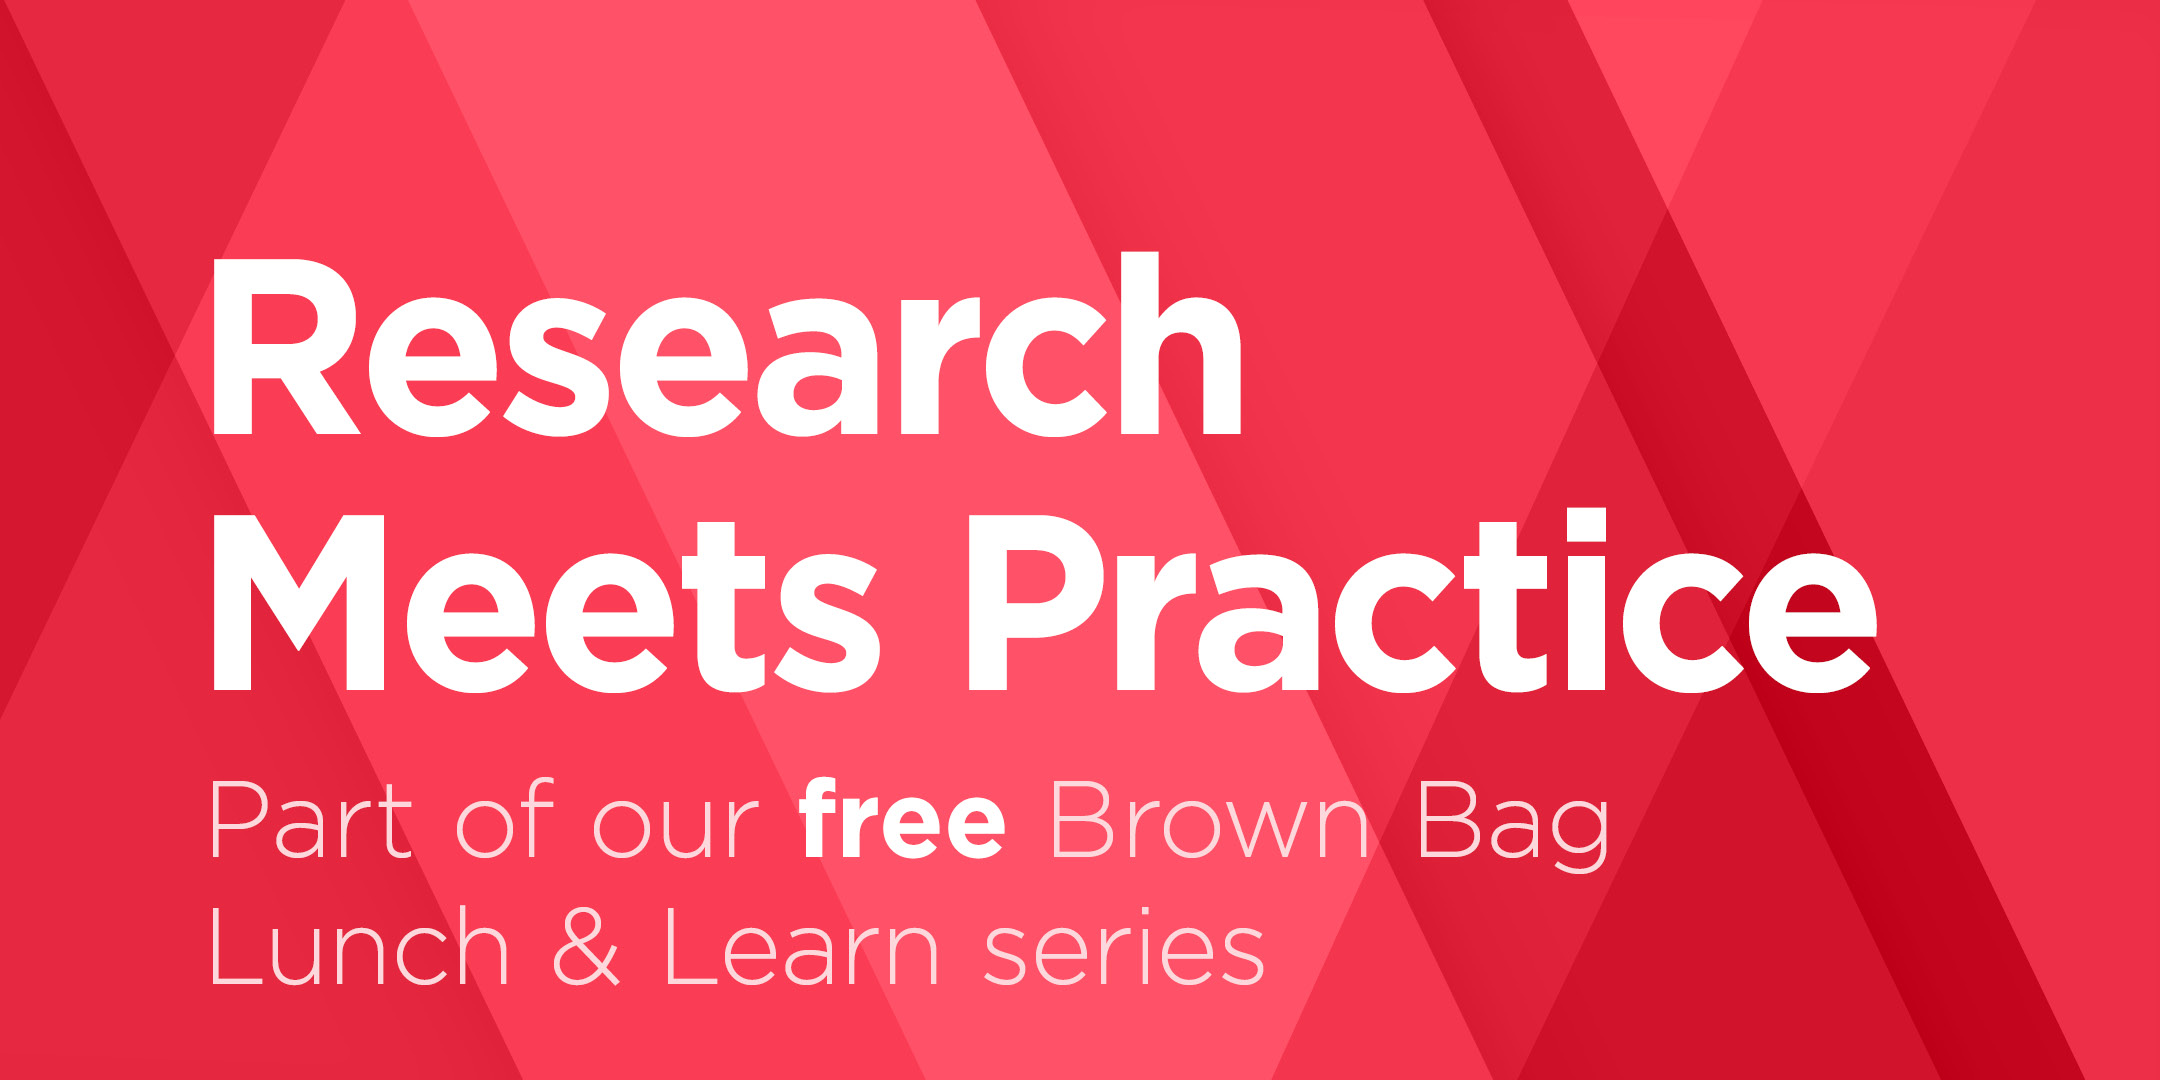 Research Meets Practice: Part of our free Brown Bag Lunch & Learn series